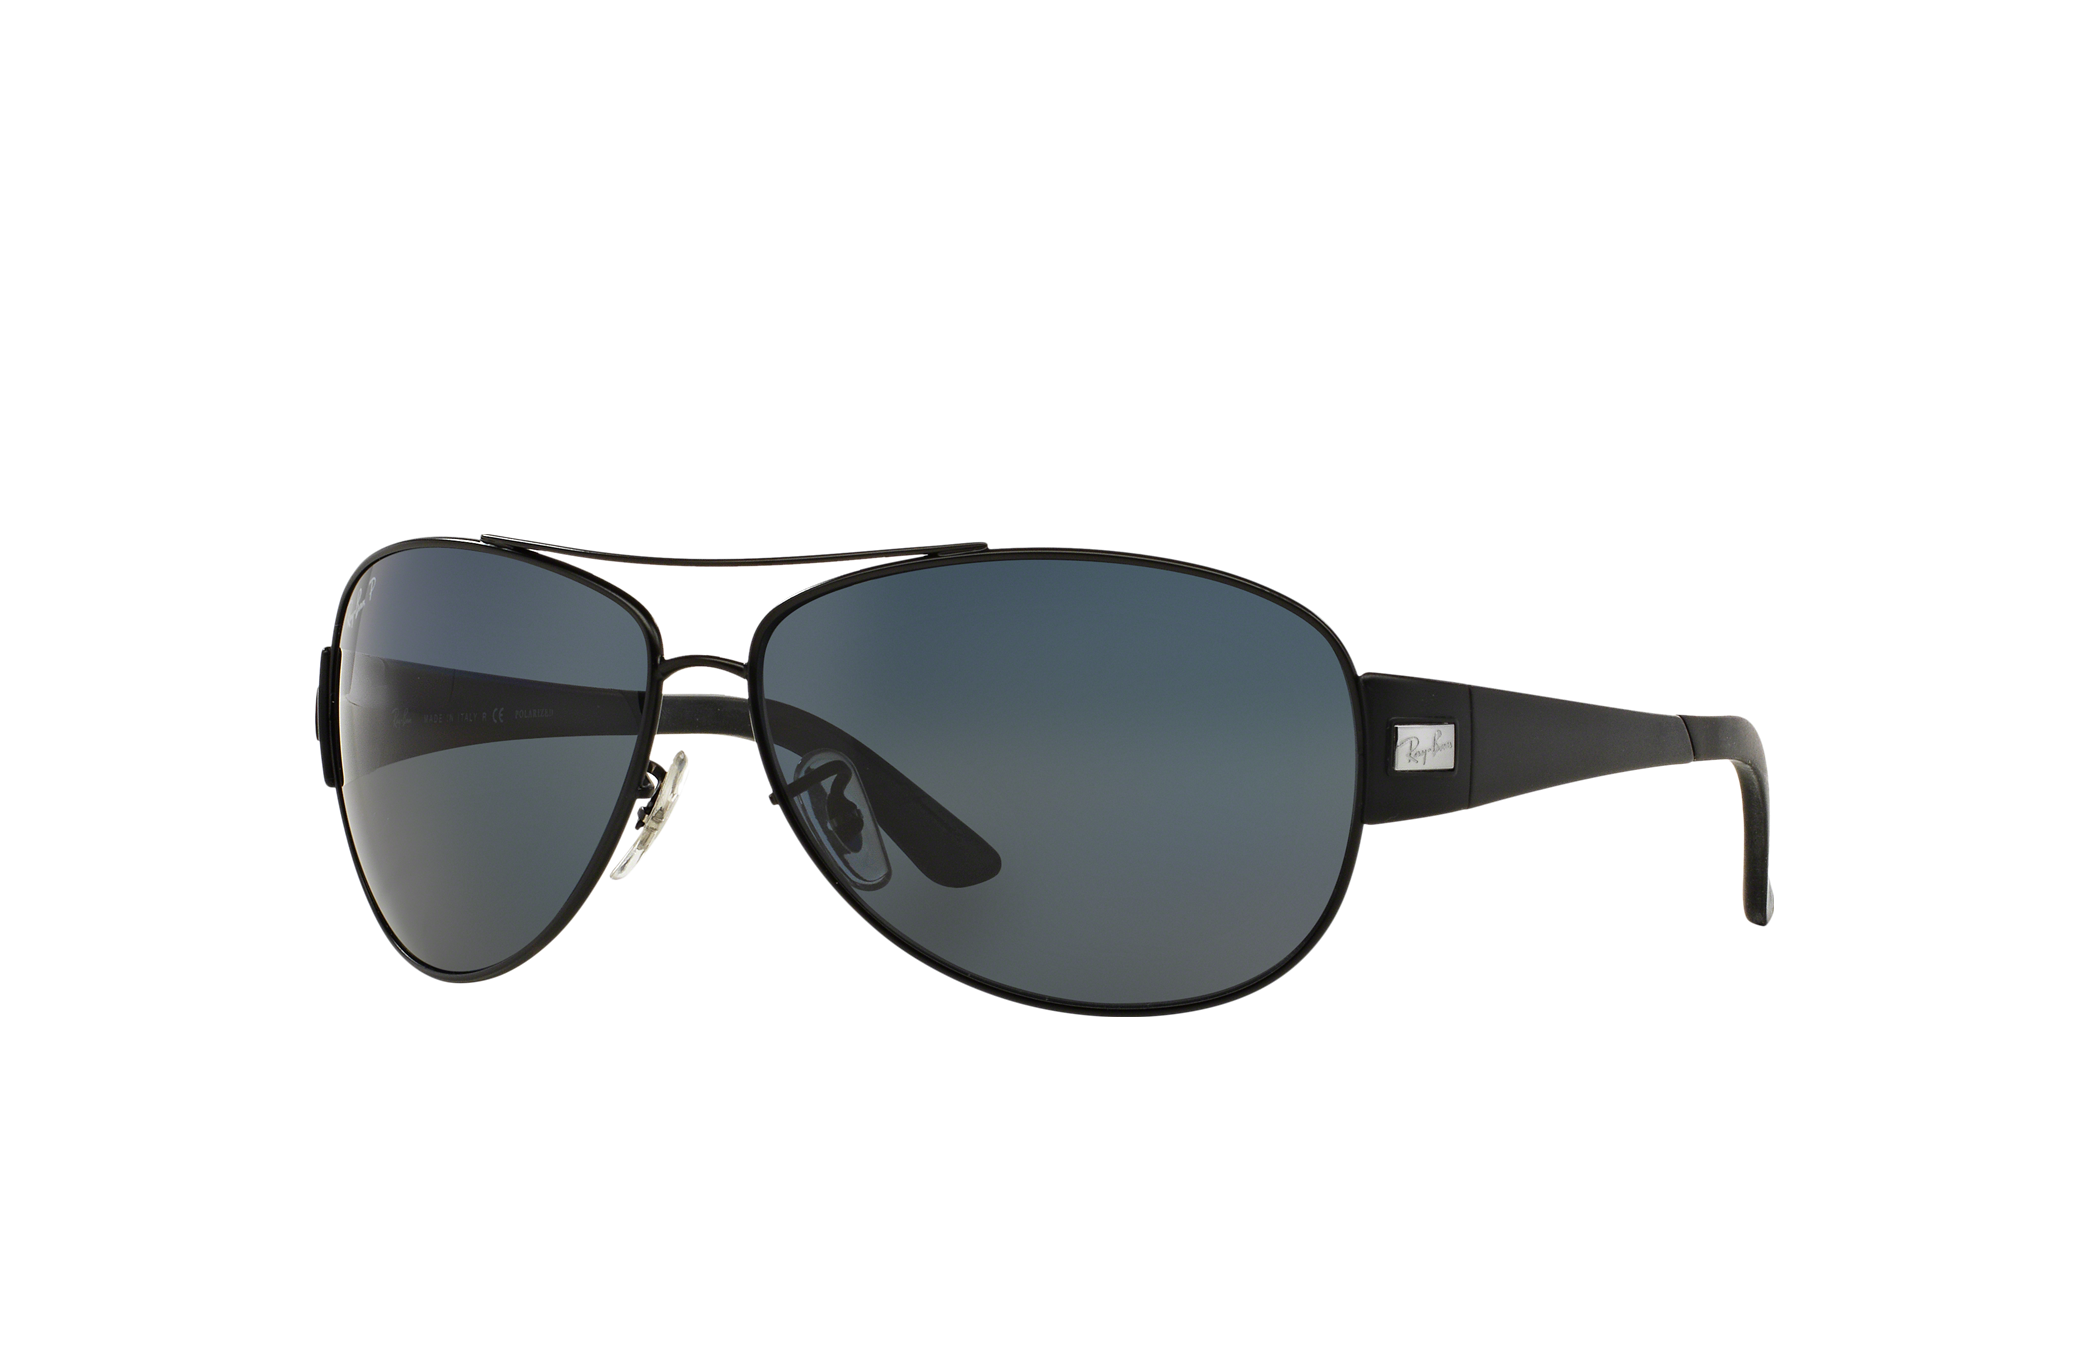 Rb3467 Sunglasses in Black and Grey - RB3467 | Ray-Ban® US